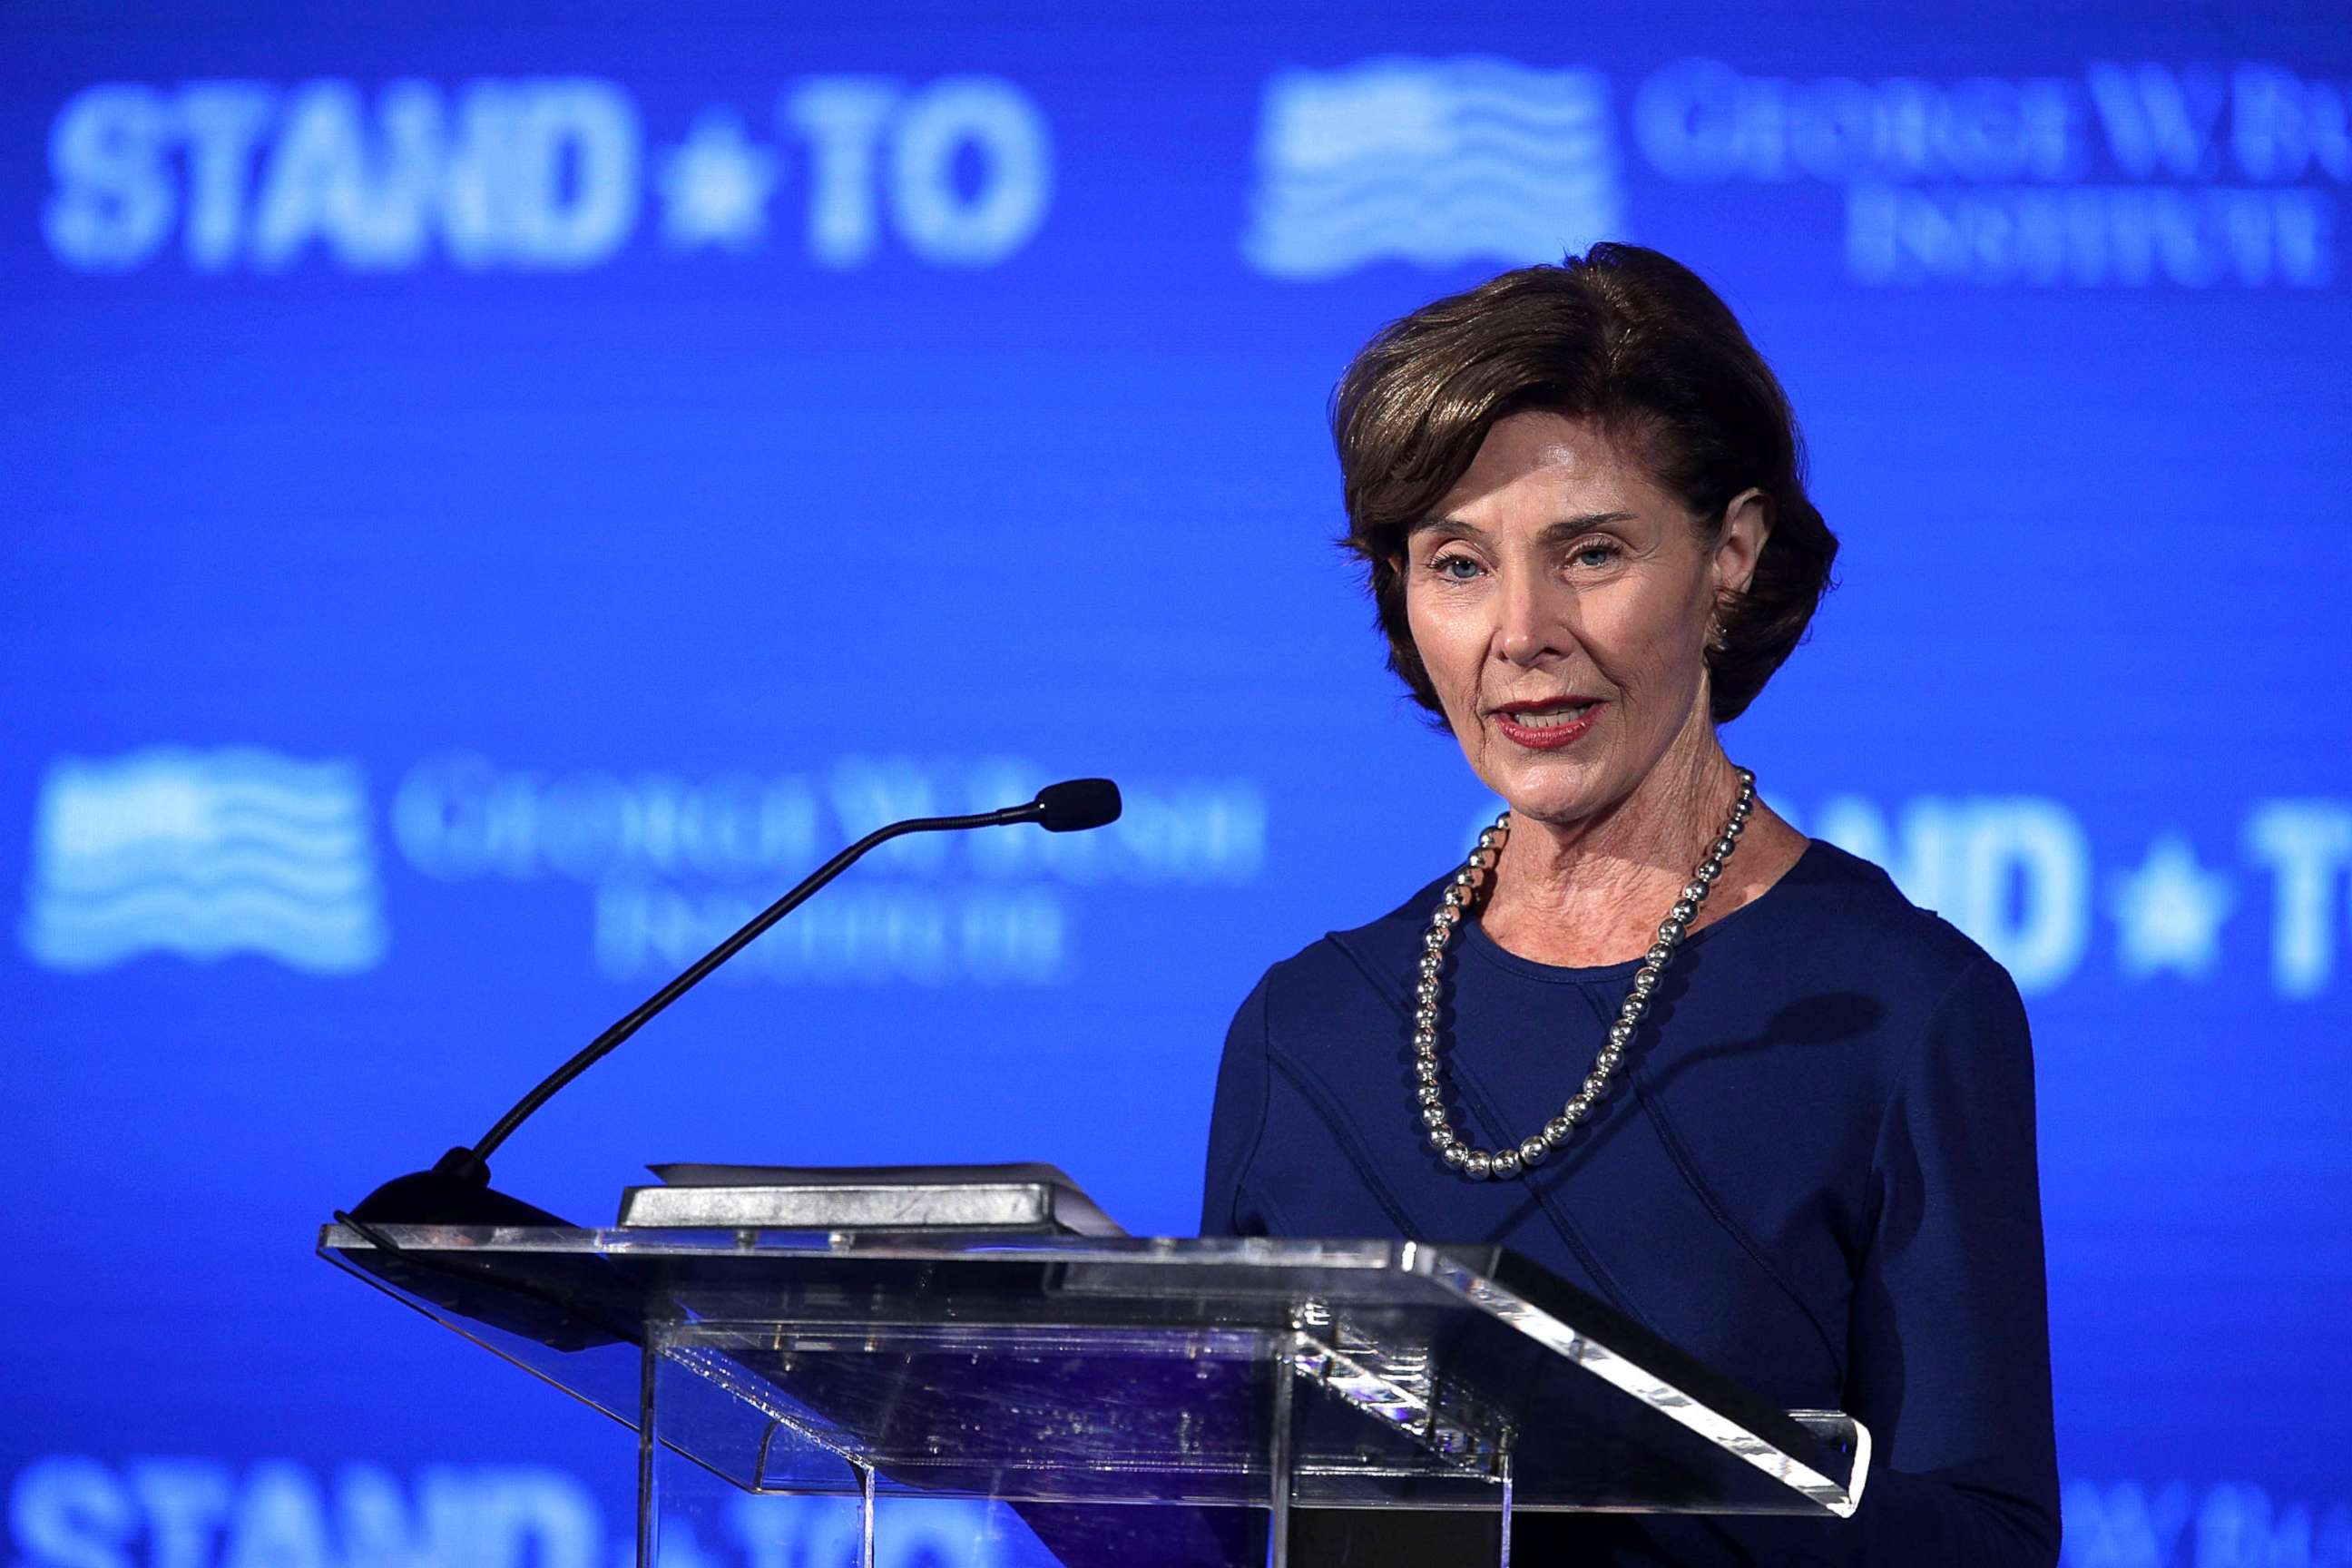 PHOTO: Former U.S. first lady Laura Bush speaks during a conference at the U.S. Chamber of Commerce, June 23, 2017, in Washington, DC.